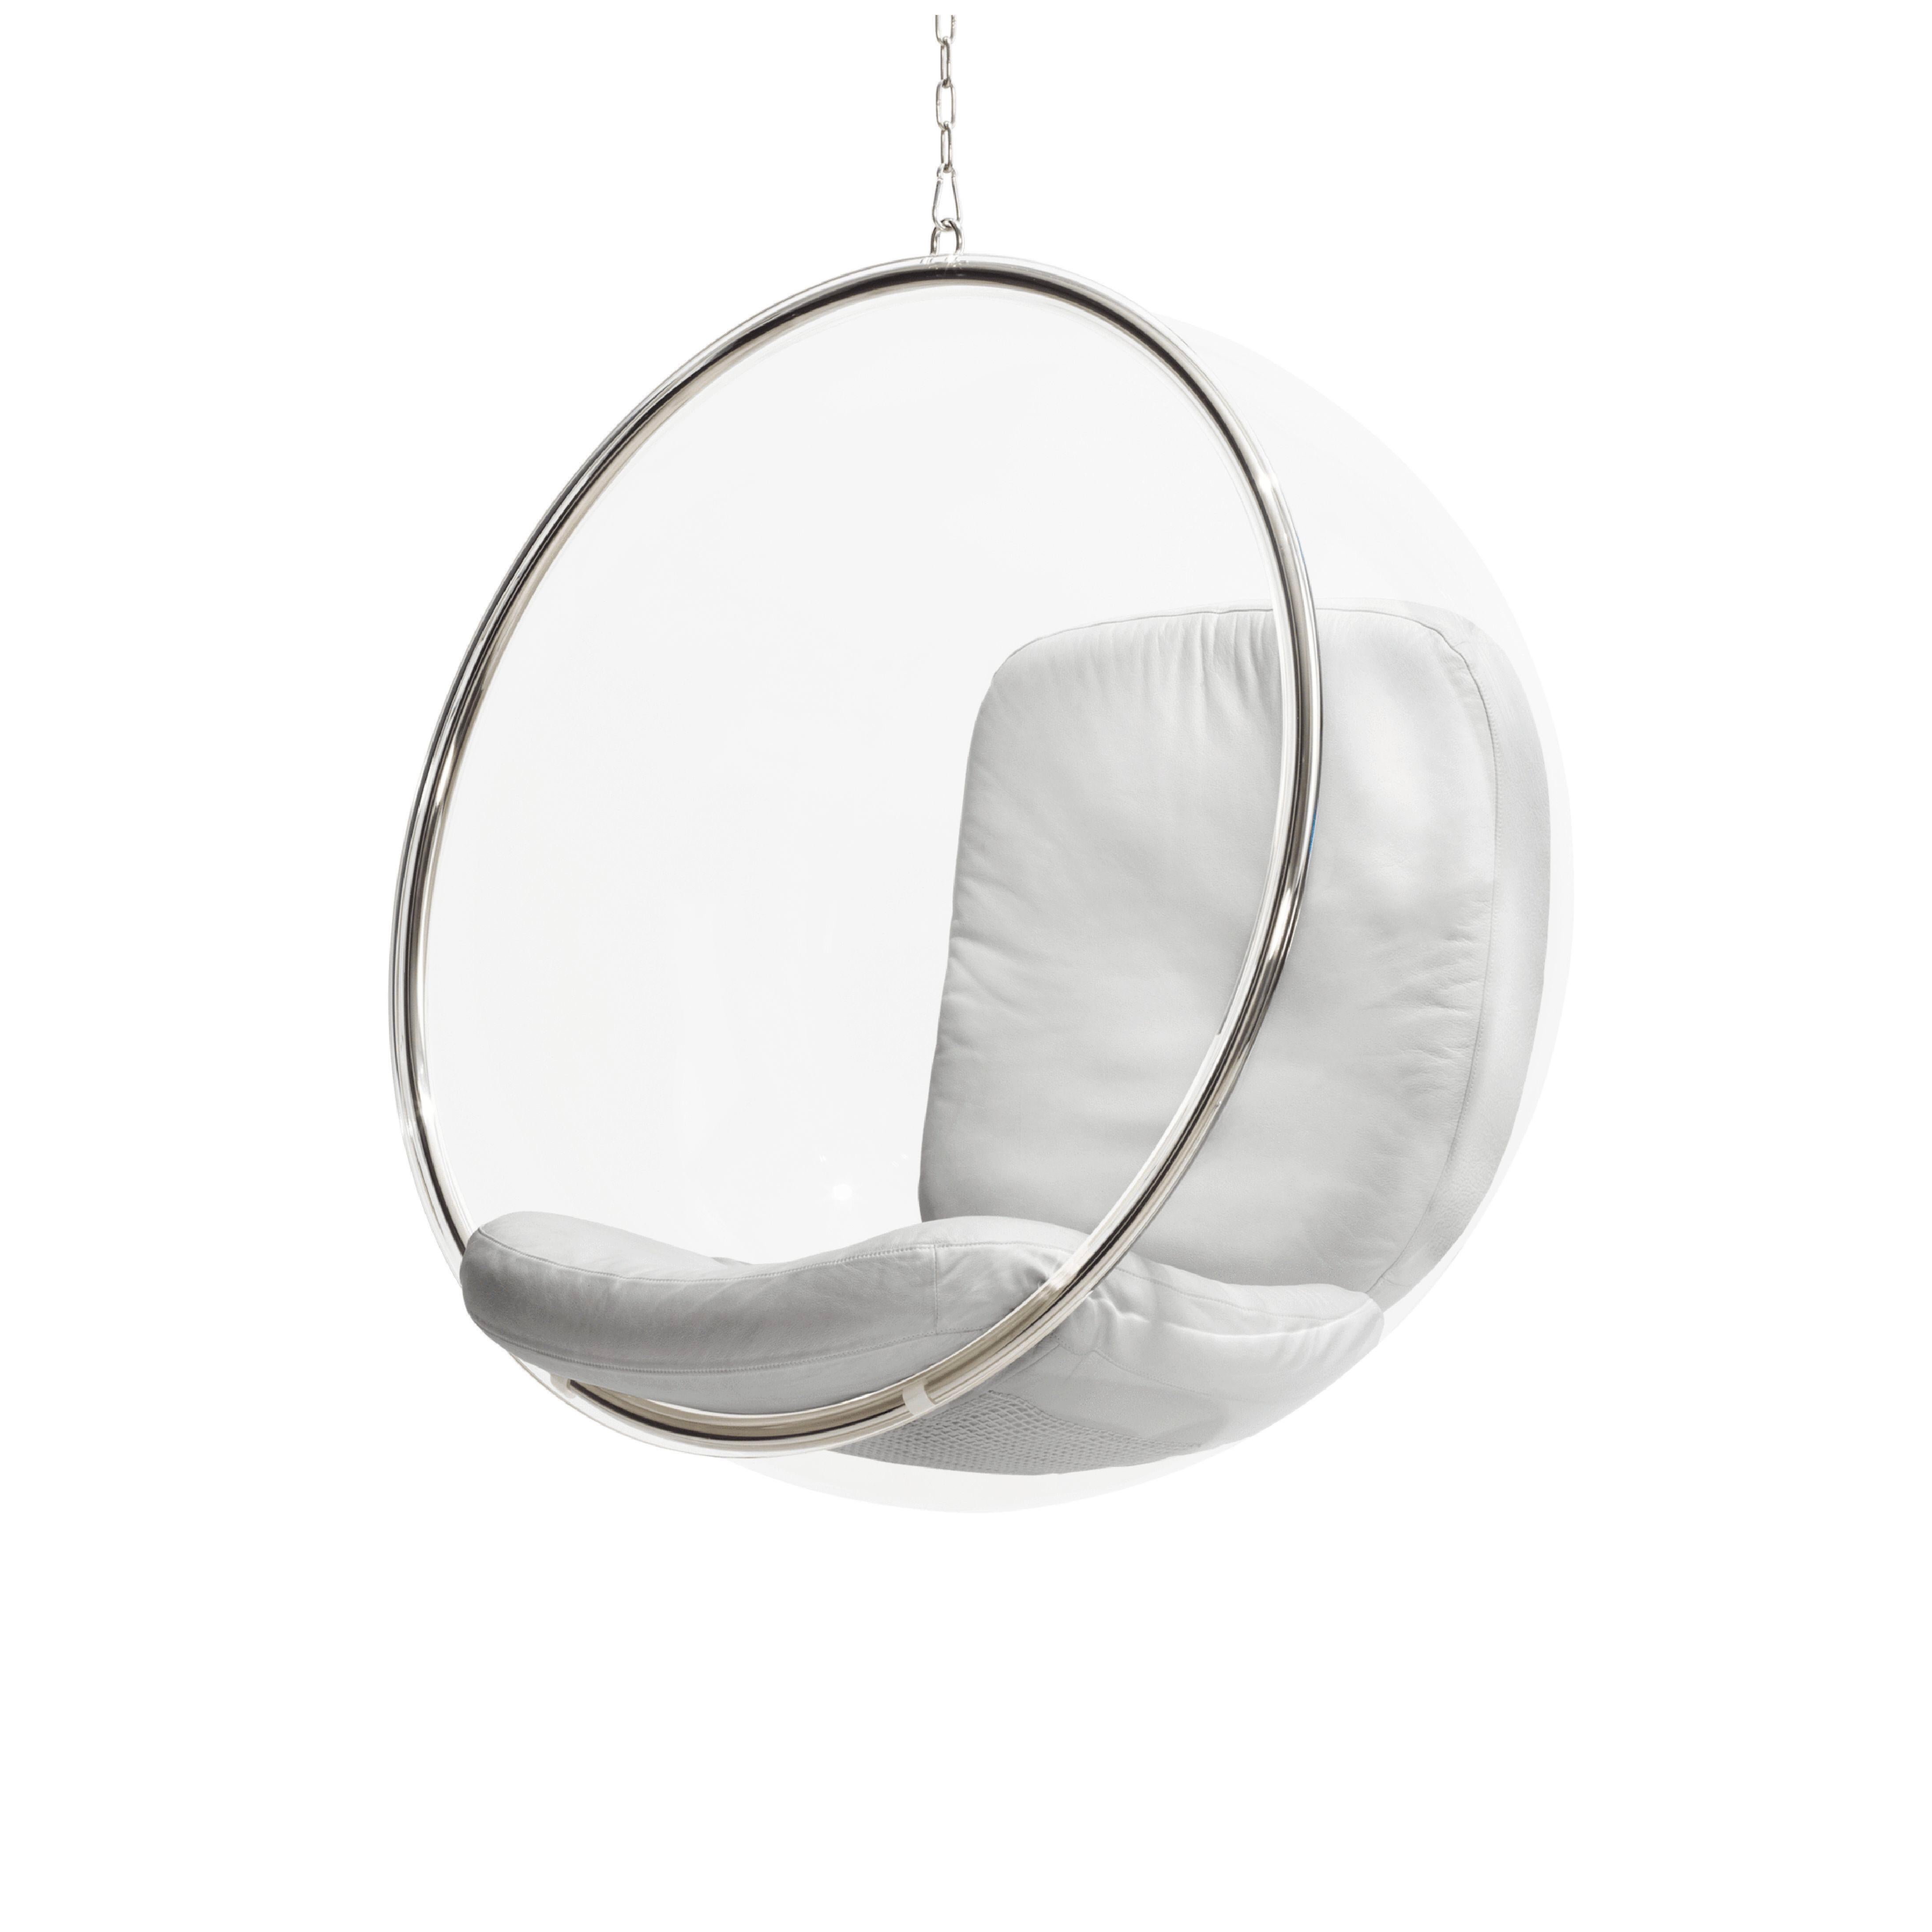 Eero Aarnio's bubble chair from 1968 is based on the idea of Aarnio's iconic ball chair. Like the ball chair, the bubble chair has a simple shape – a ball – but is made of different materials and does not have a pedestal but hangs from the ceiling!